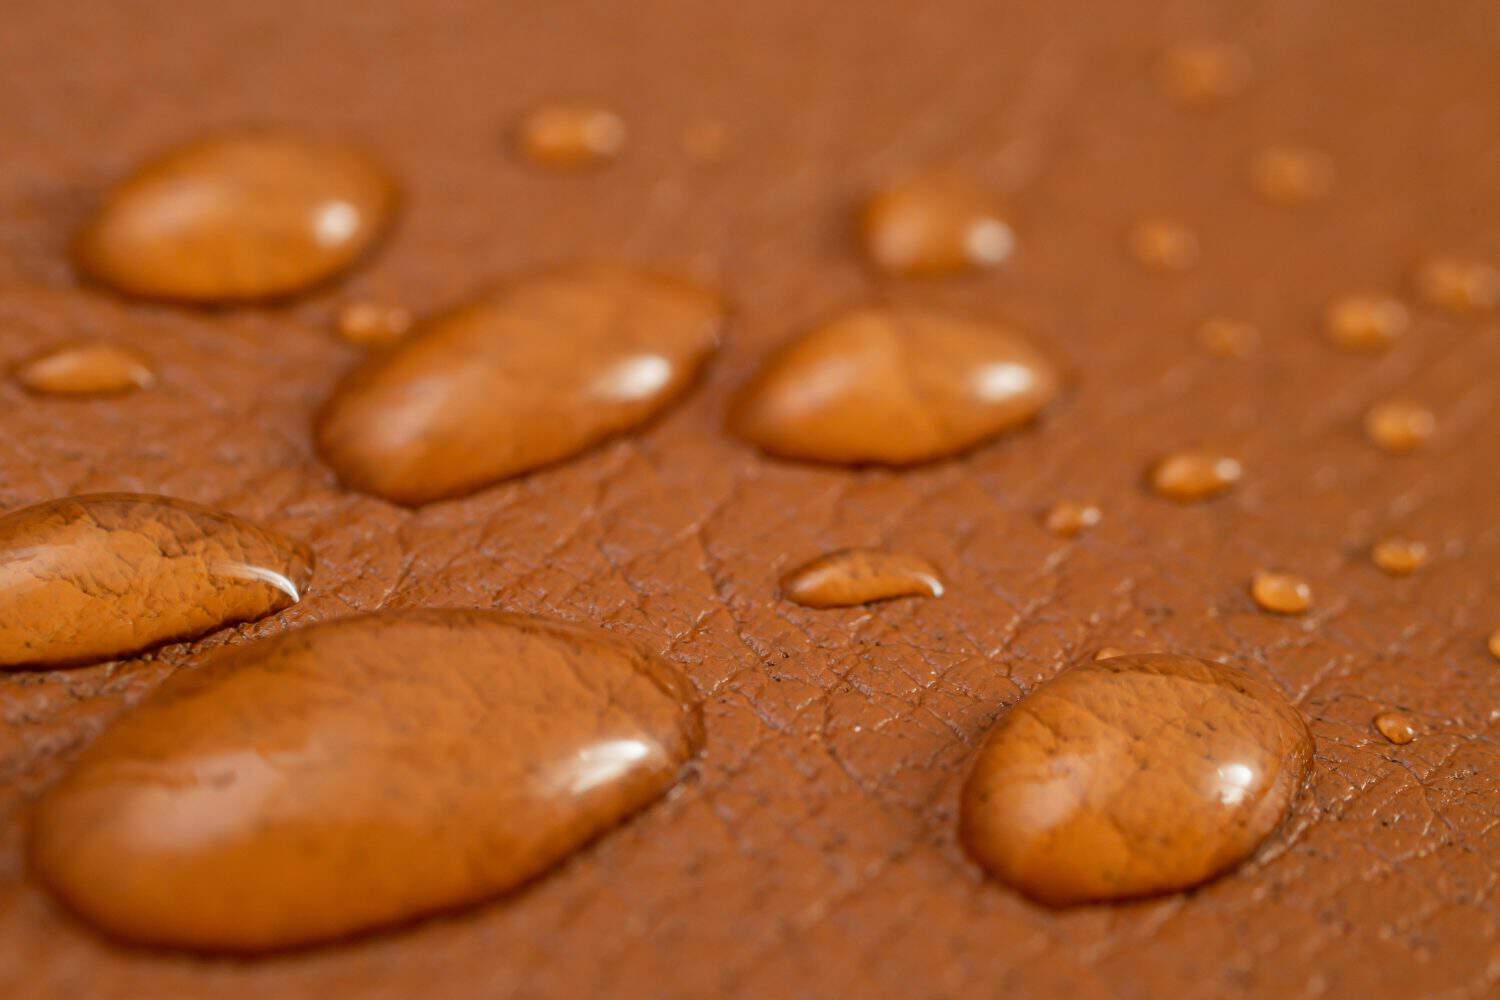 Round water drops on brown leather texture, side view, soft focus macro pattern